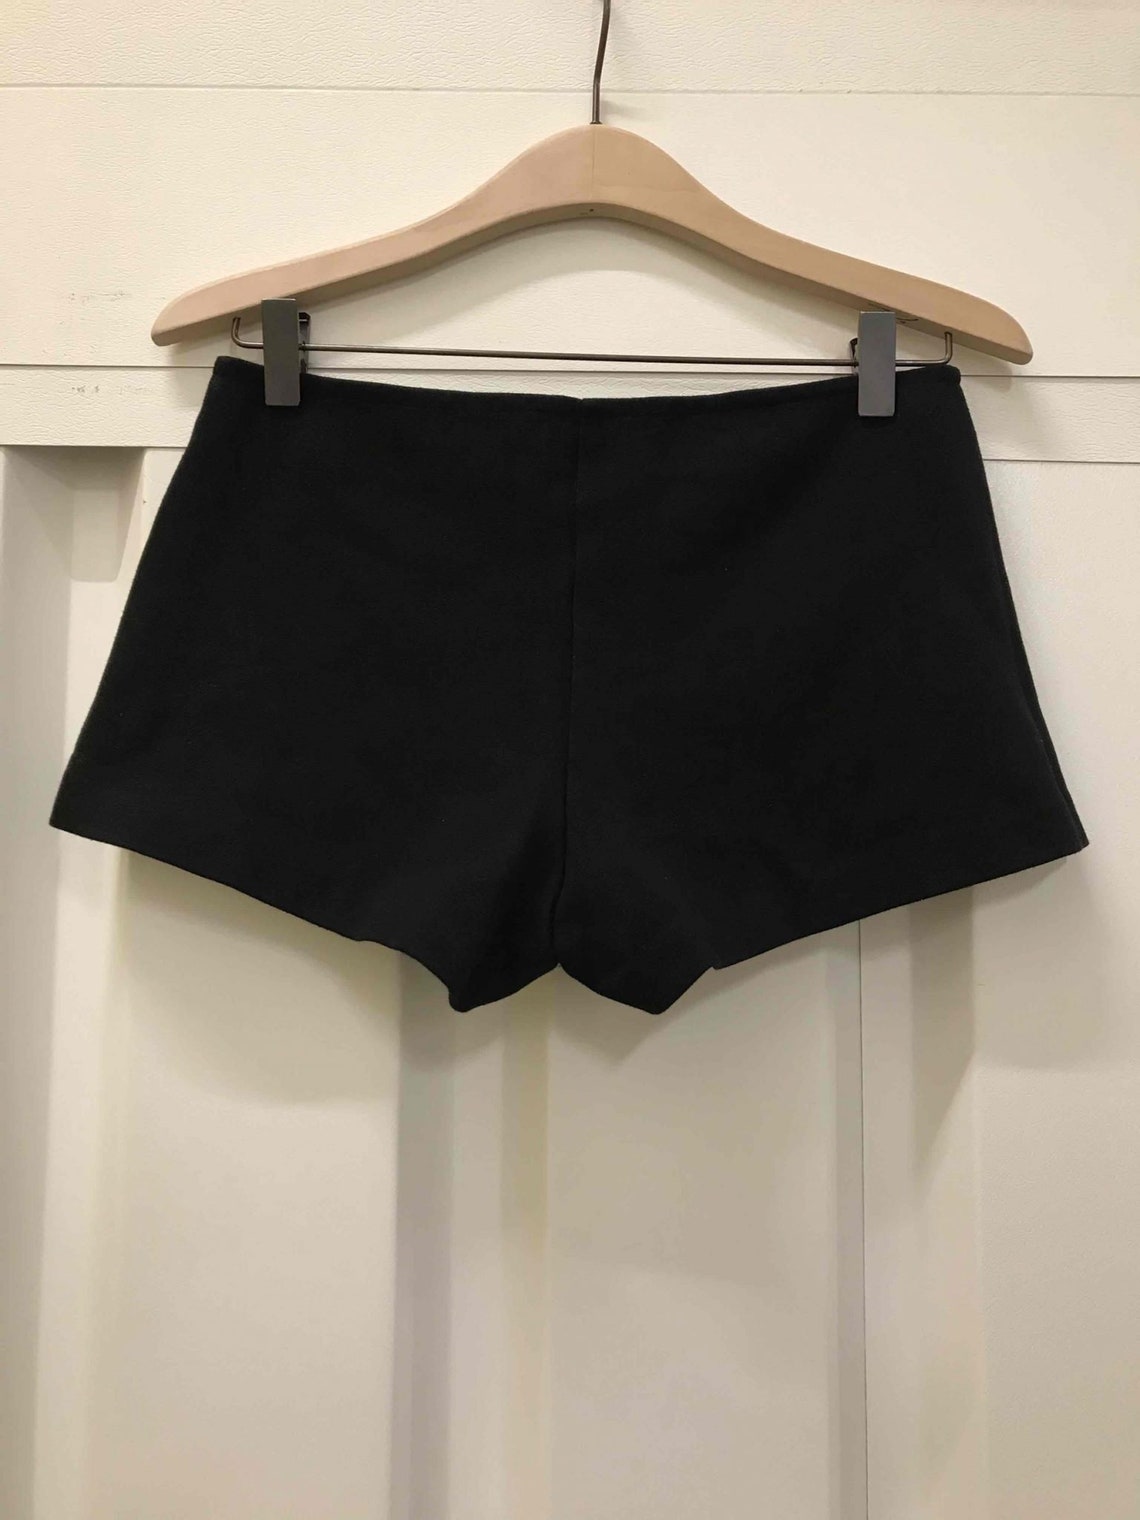 1990s Agnes B micro short culotte black with silver zip | Etsy